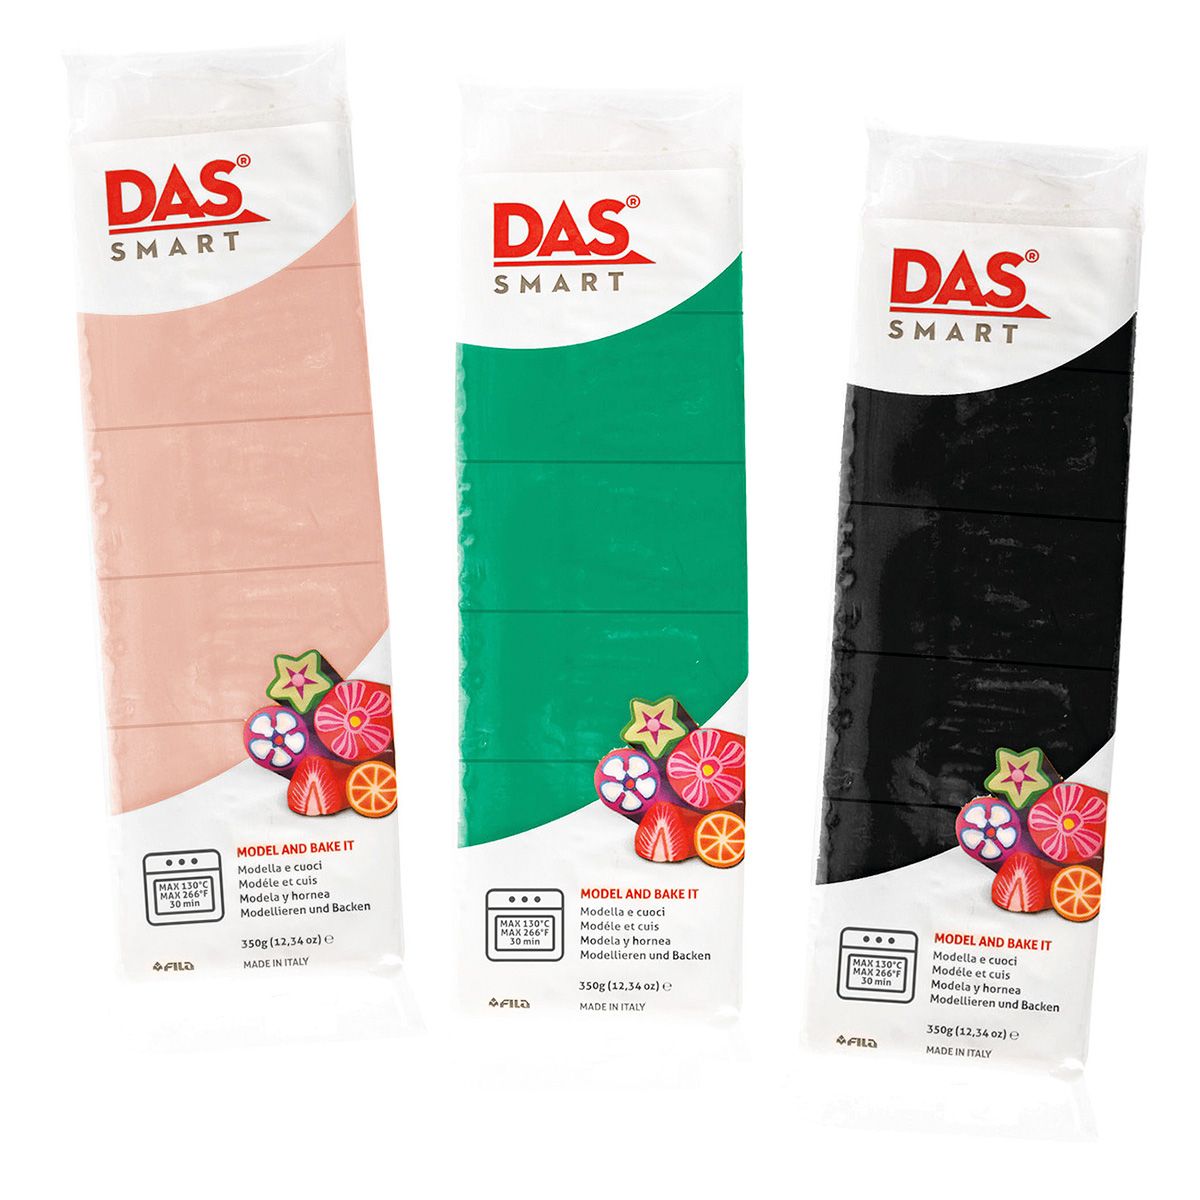 12.34oz DAS Smart Modeling Clay and Sets